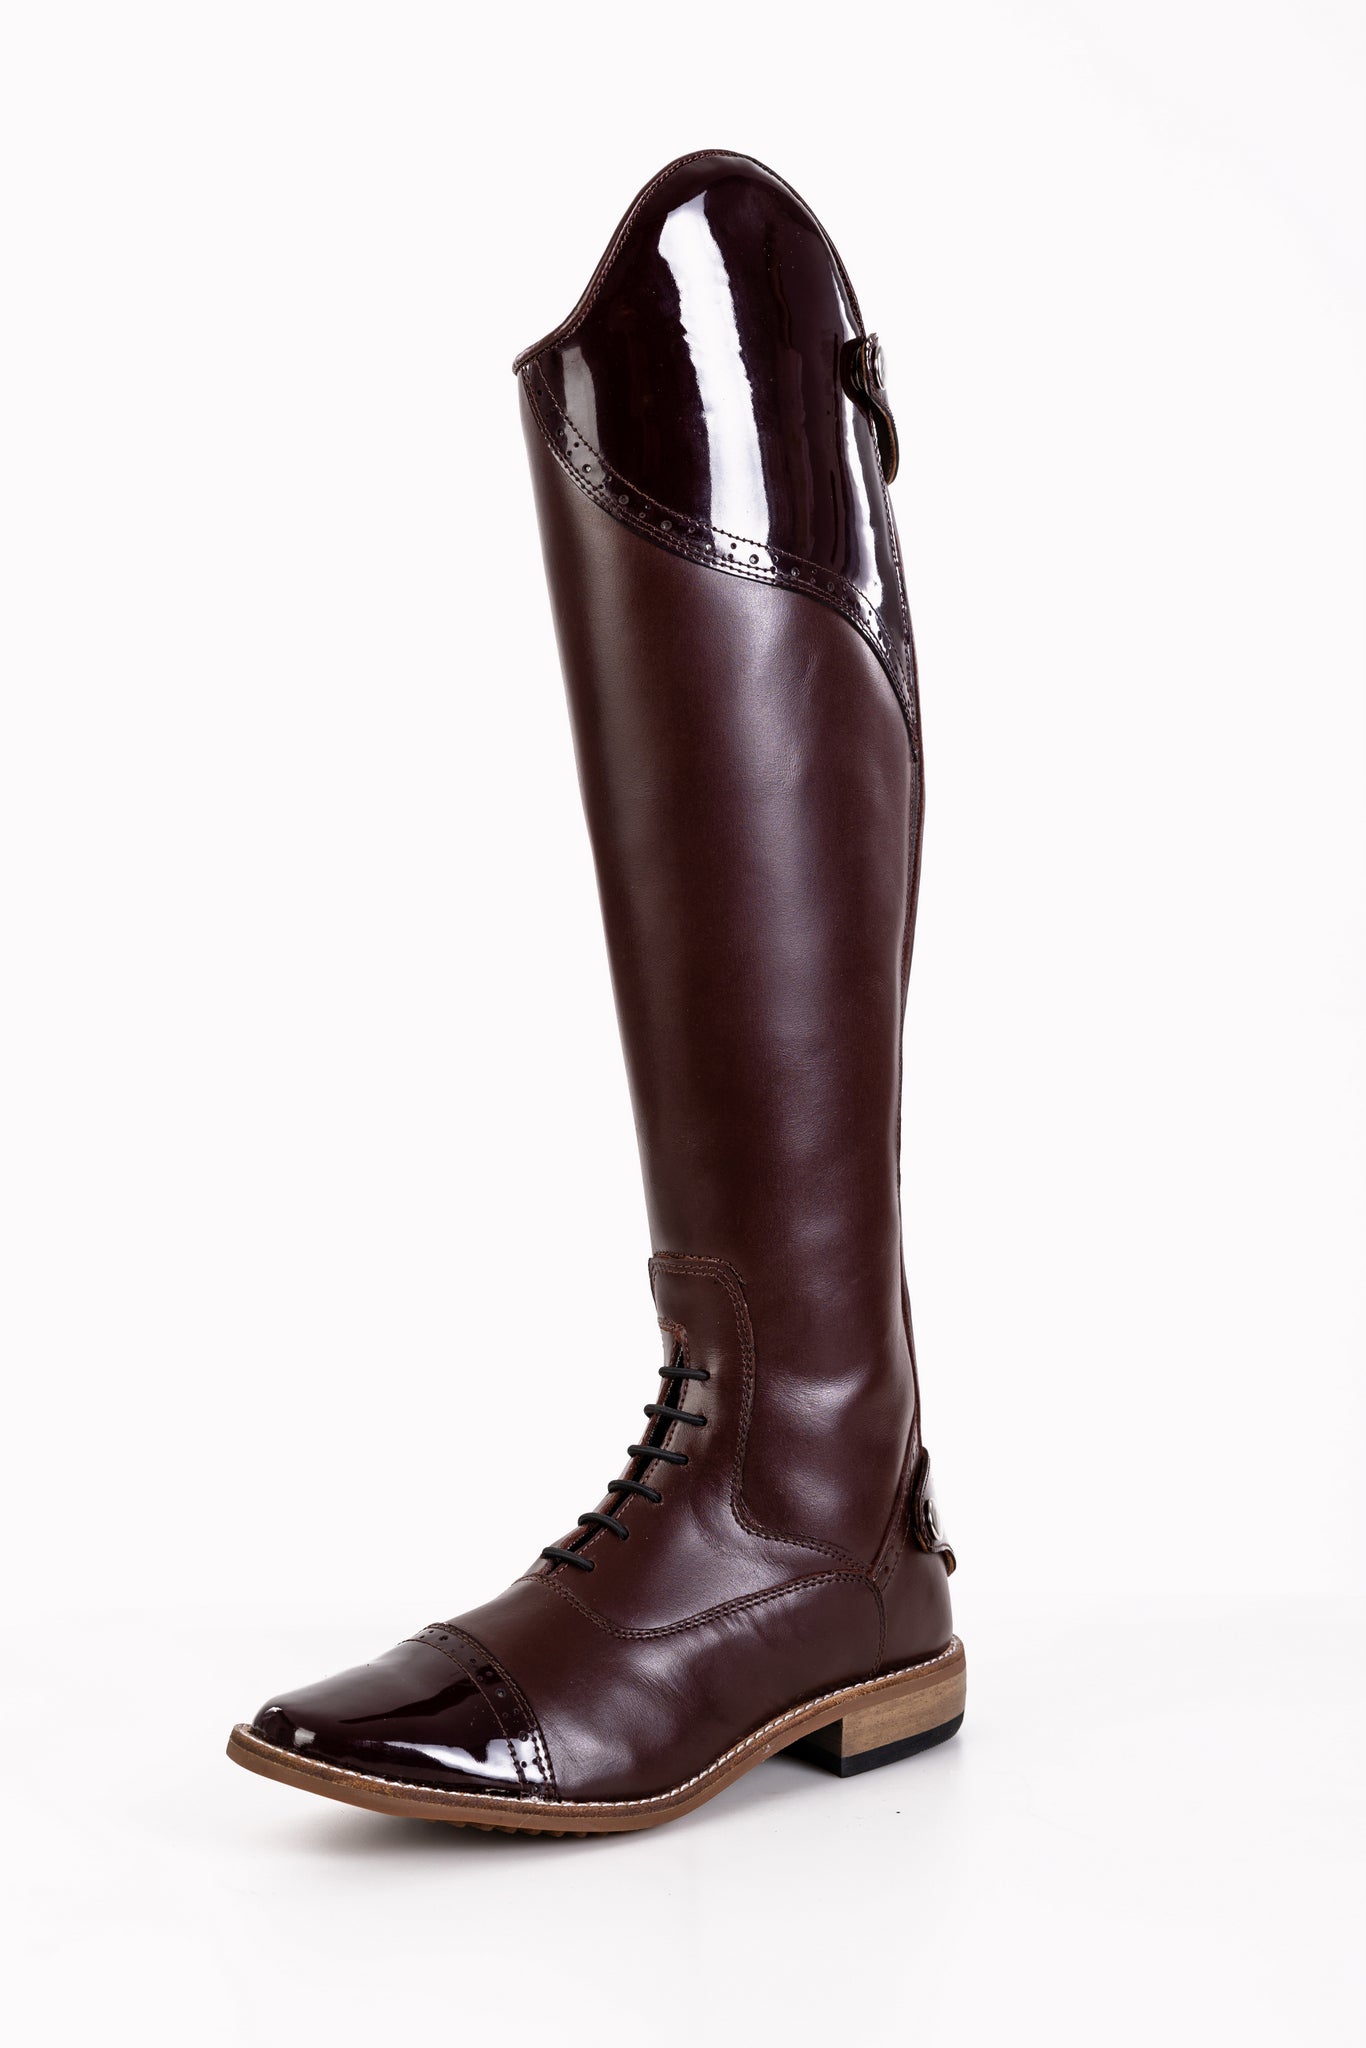 Two Tone Riding Boots | Hello Quality Equestrian